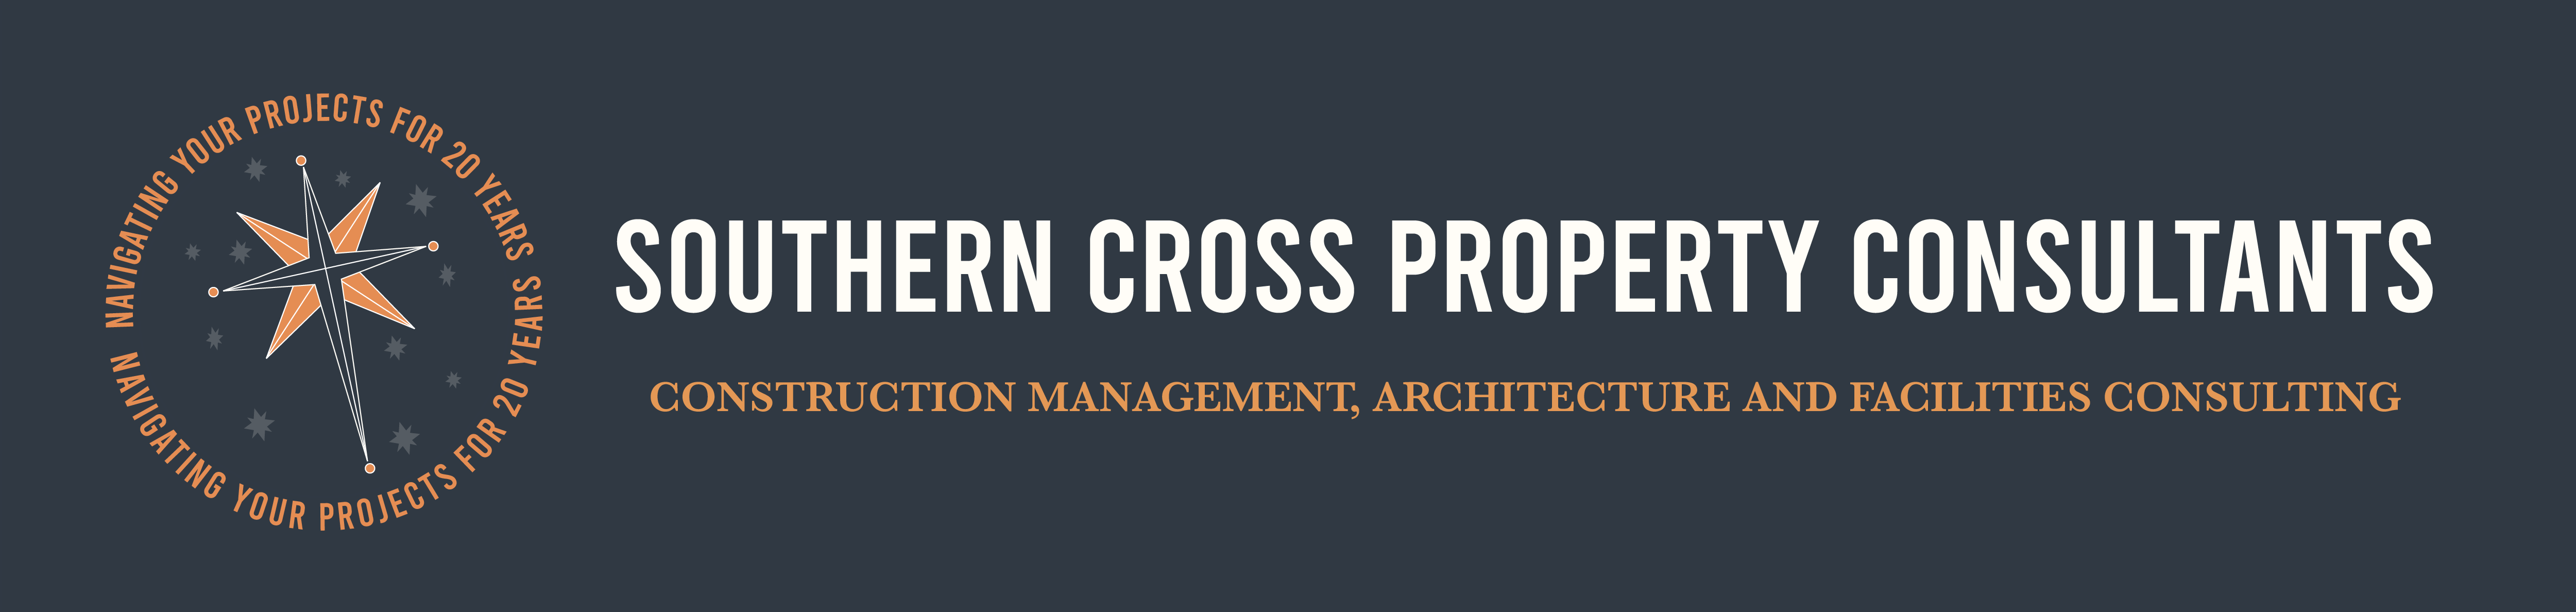 Southern Cross Property Consultants